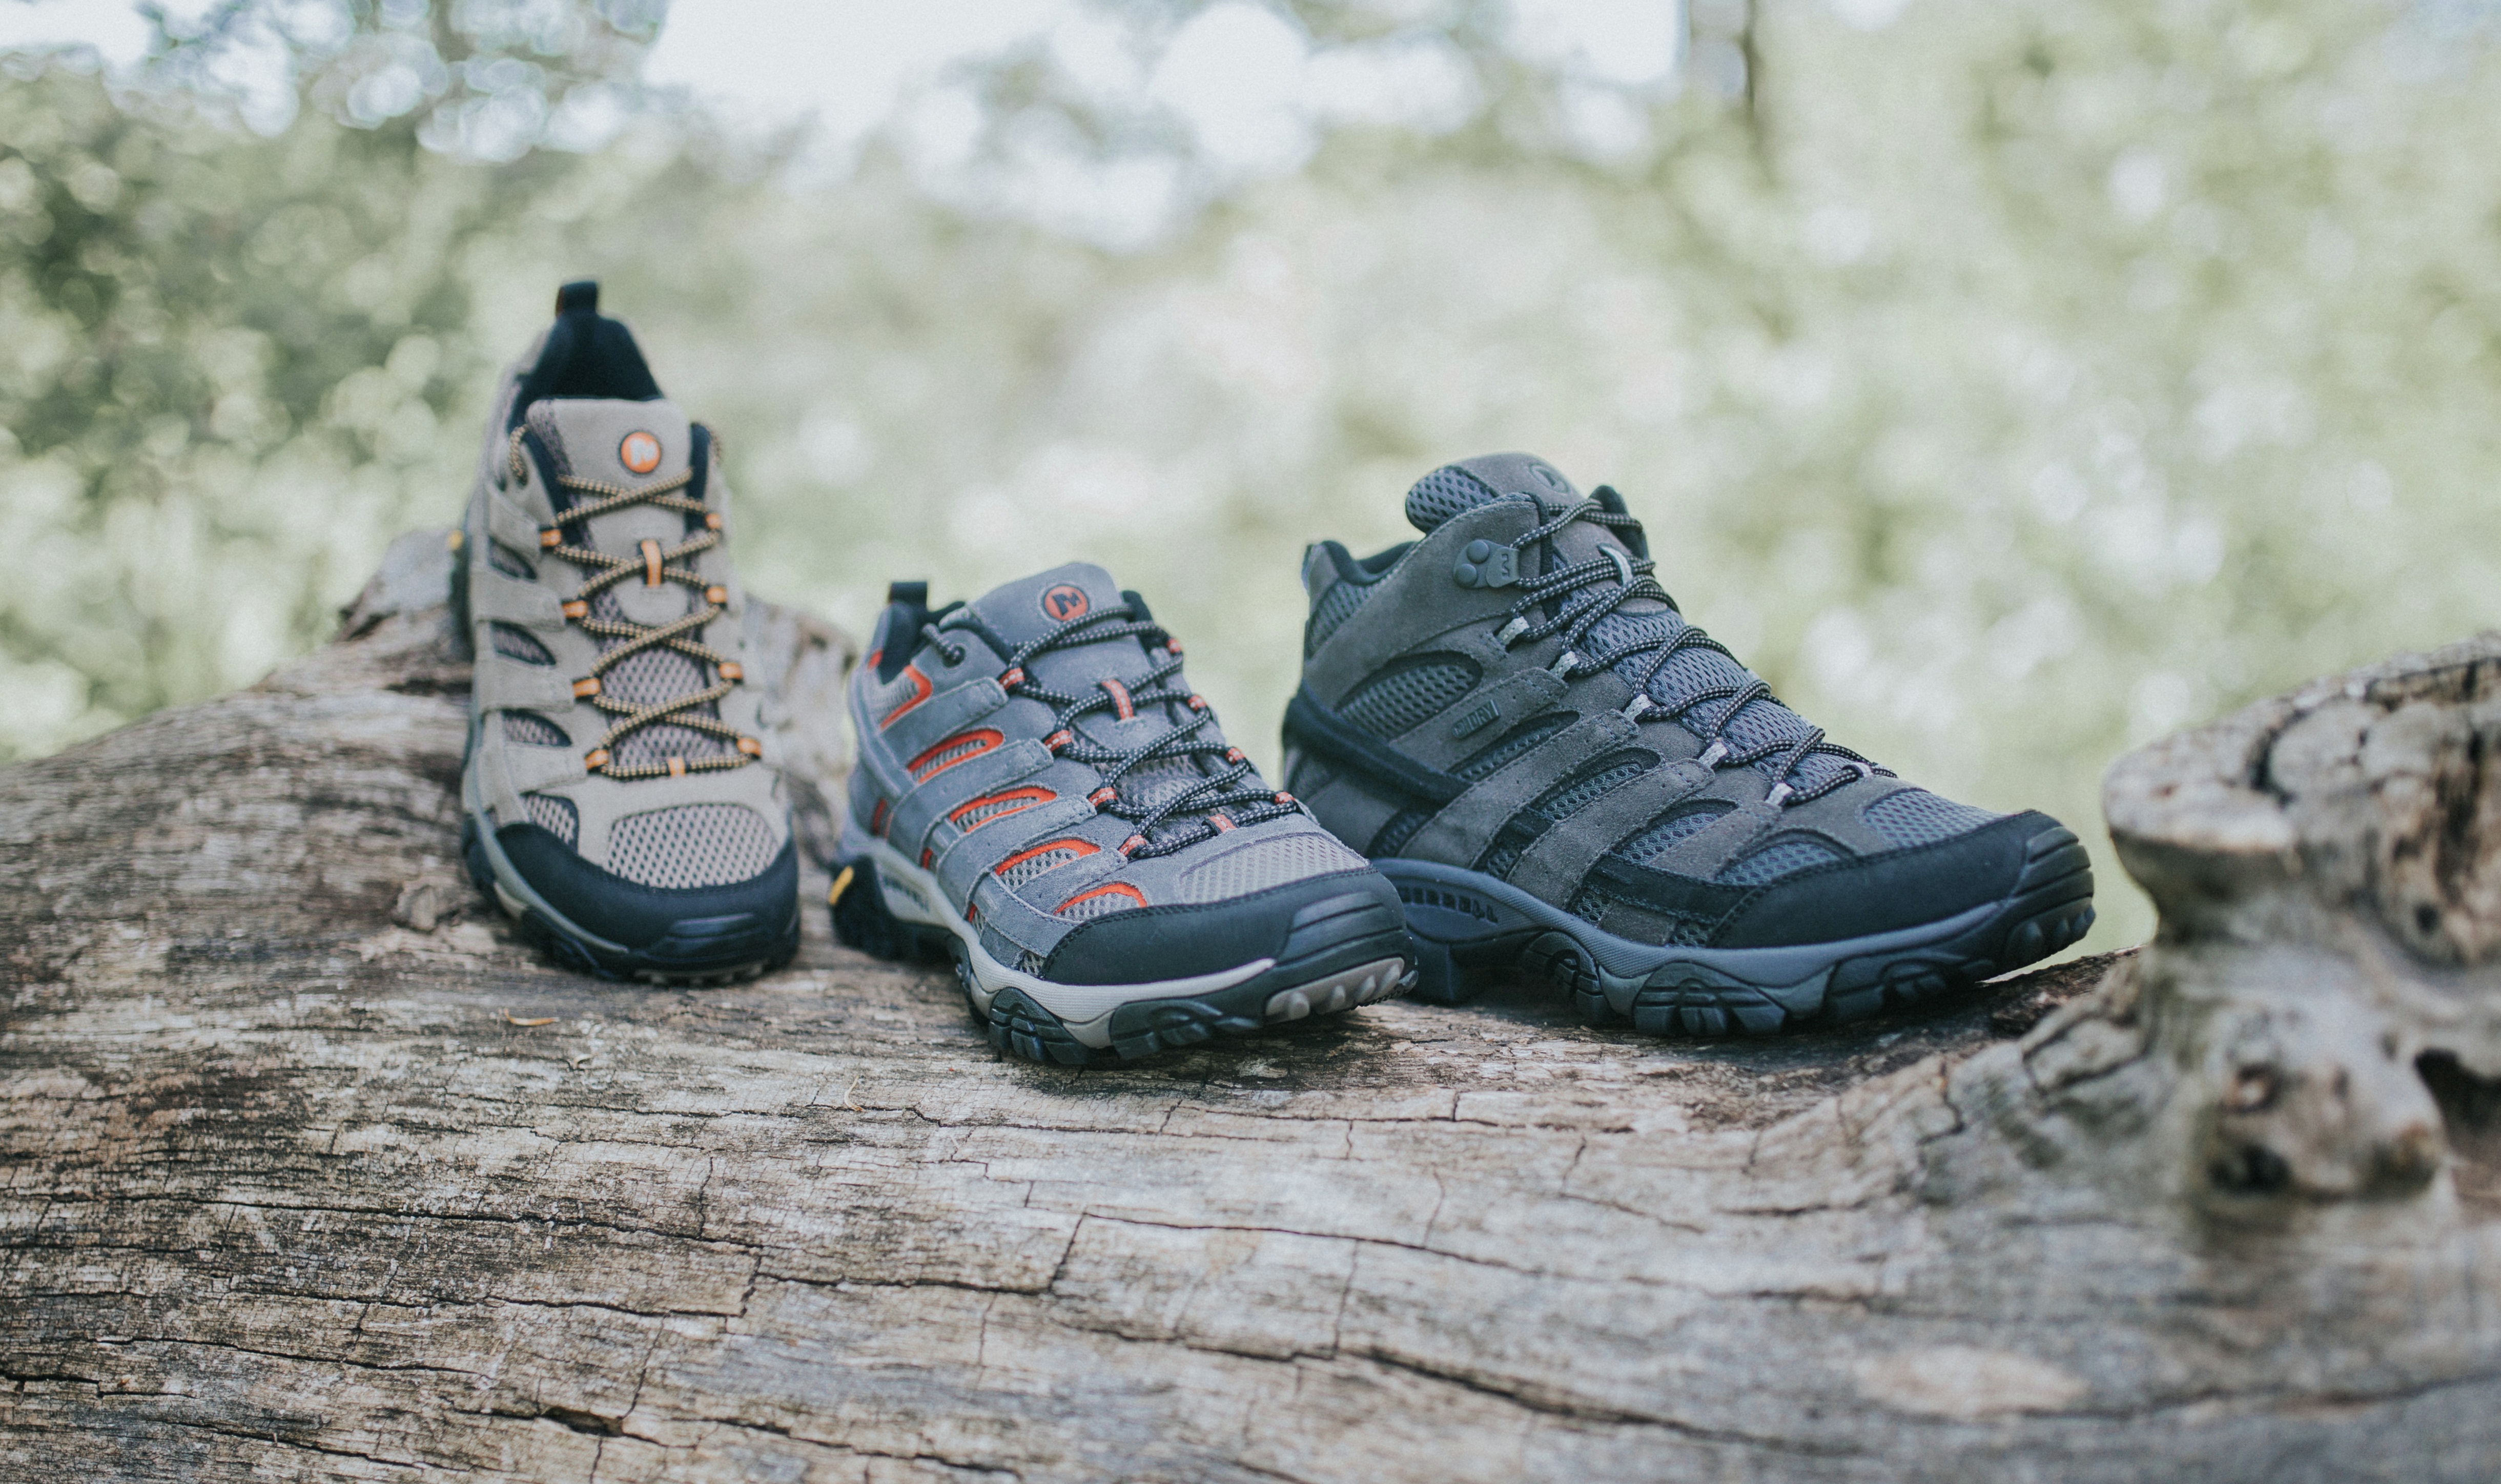 What's the Difference the New Merrell Moab 2 and the Merrell Moab? - Englin's Fine Footwear